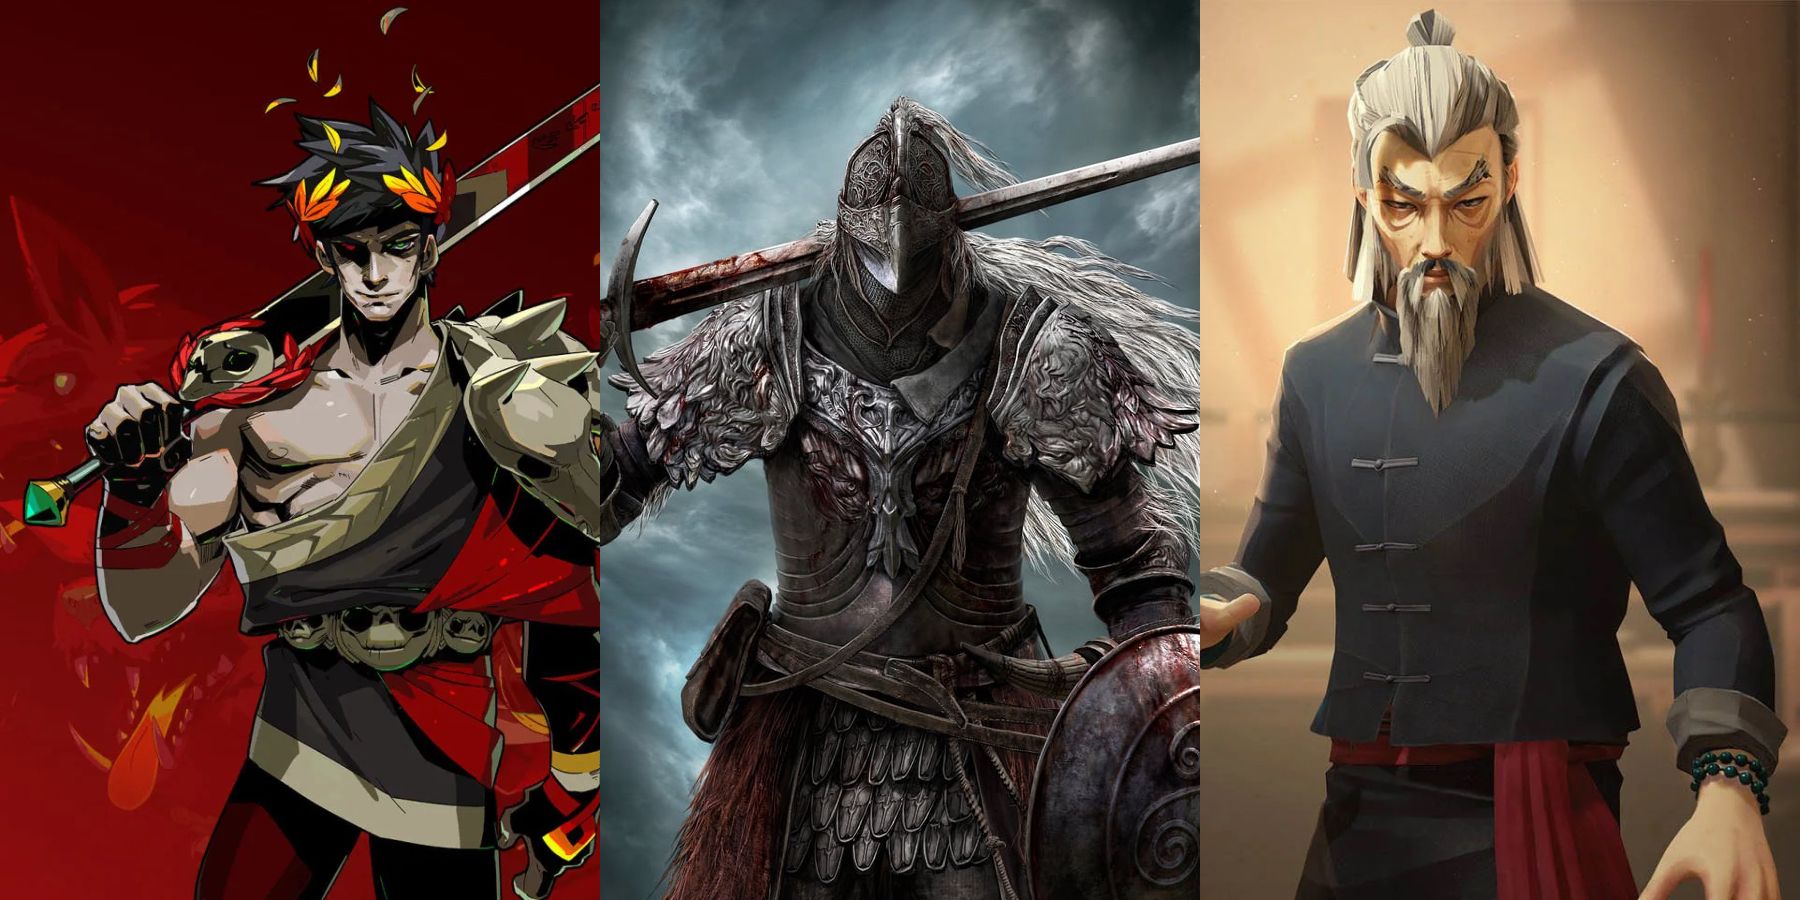 A vertically split image showing three characters from separate games. From left to right: Zagreus from Hades, holding a sword on one shoulder; a Tarnished character from Elden Ring wearing the Raging Wolf armor set, carrying a sword and shield covered in blood; and the male option for the main character in Sifu, an elderly man wearing traditional martial arts clothing.